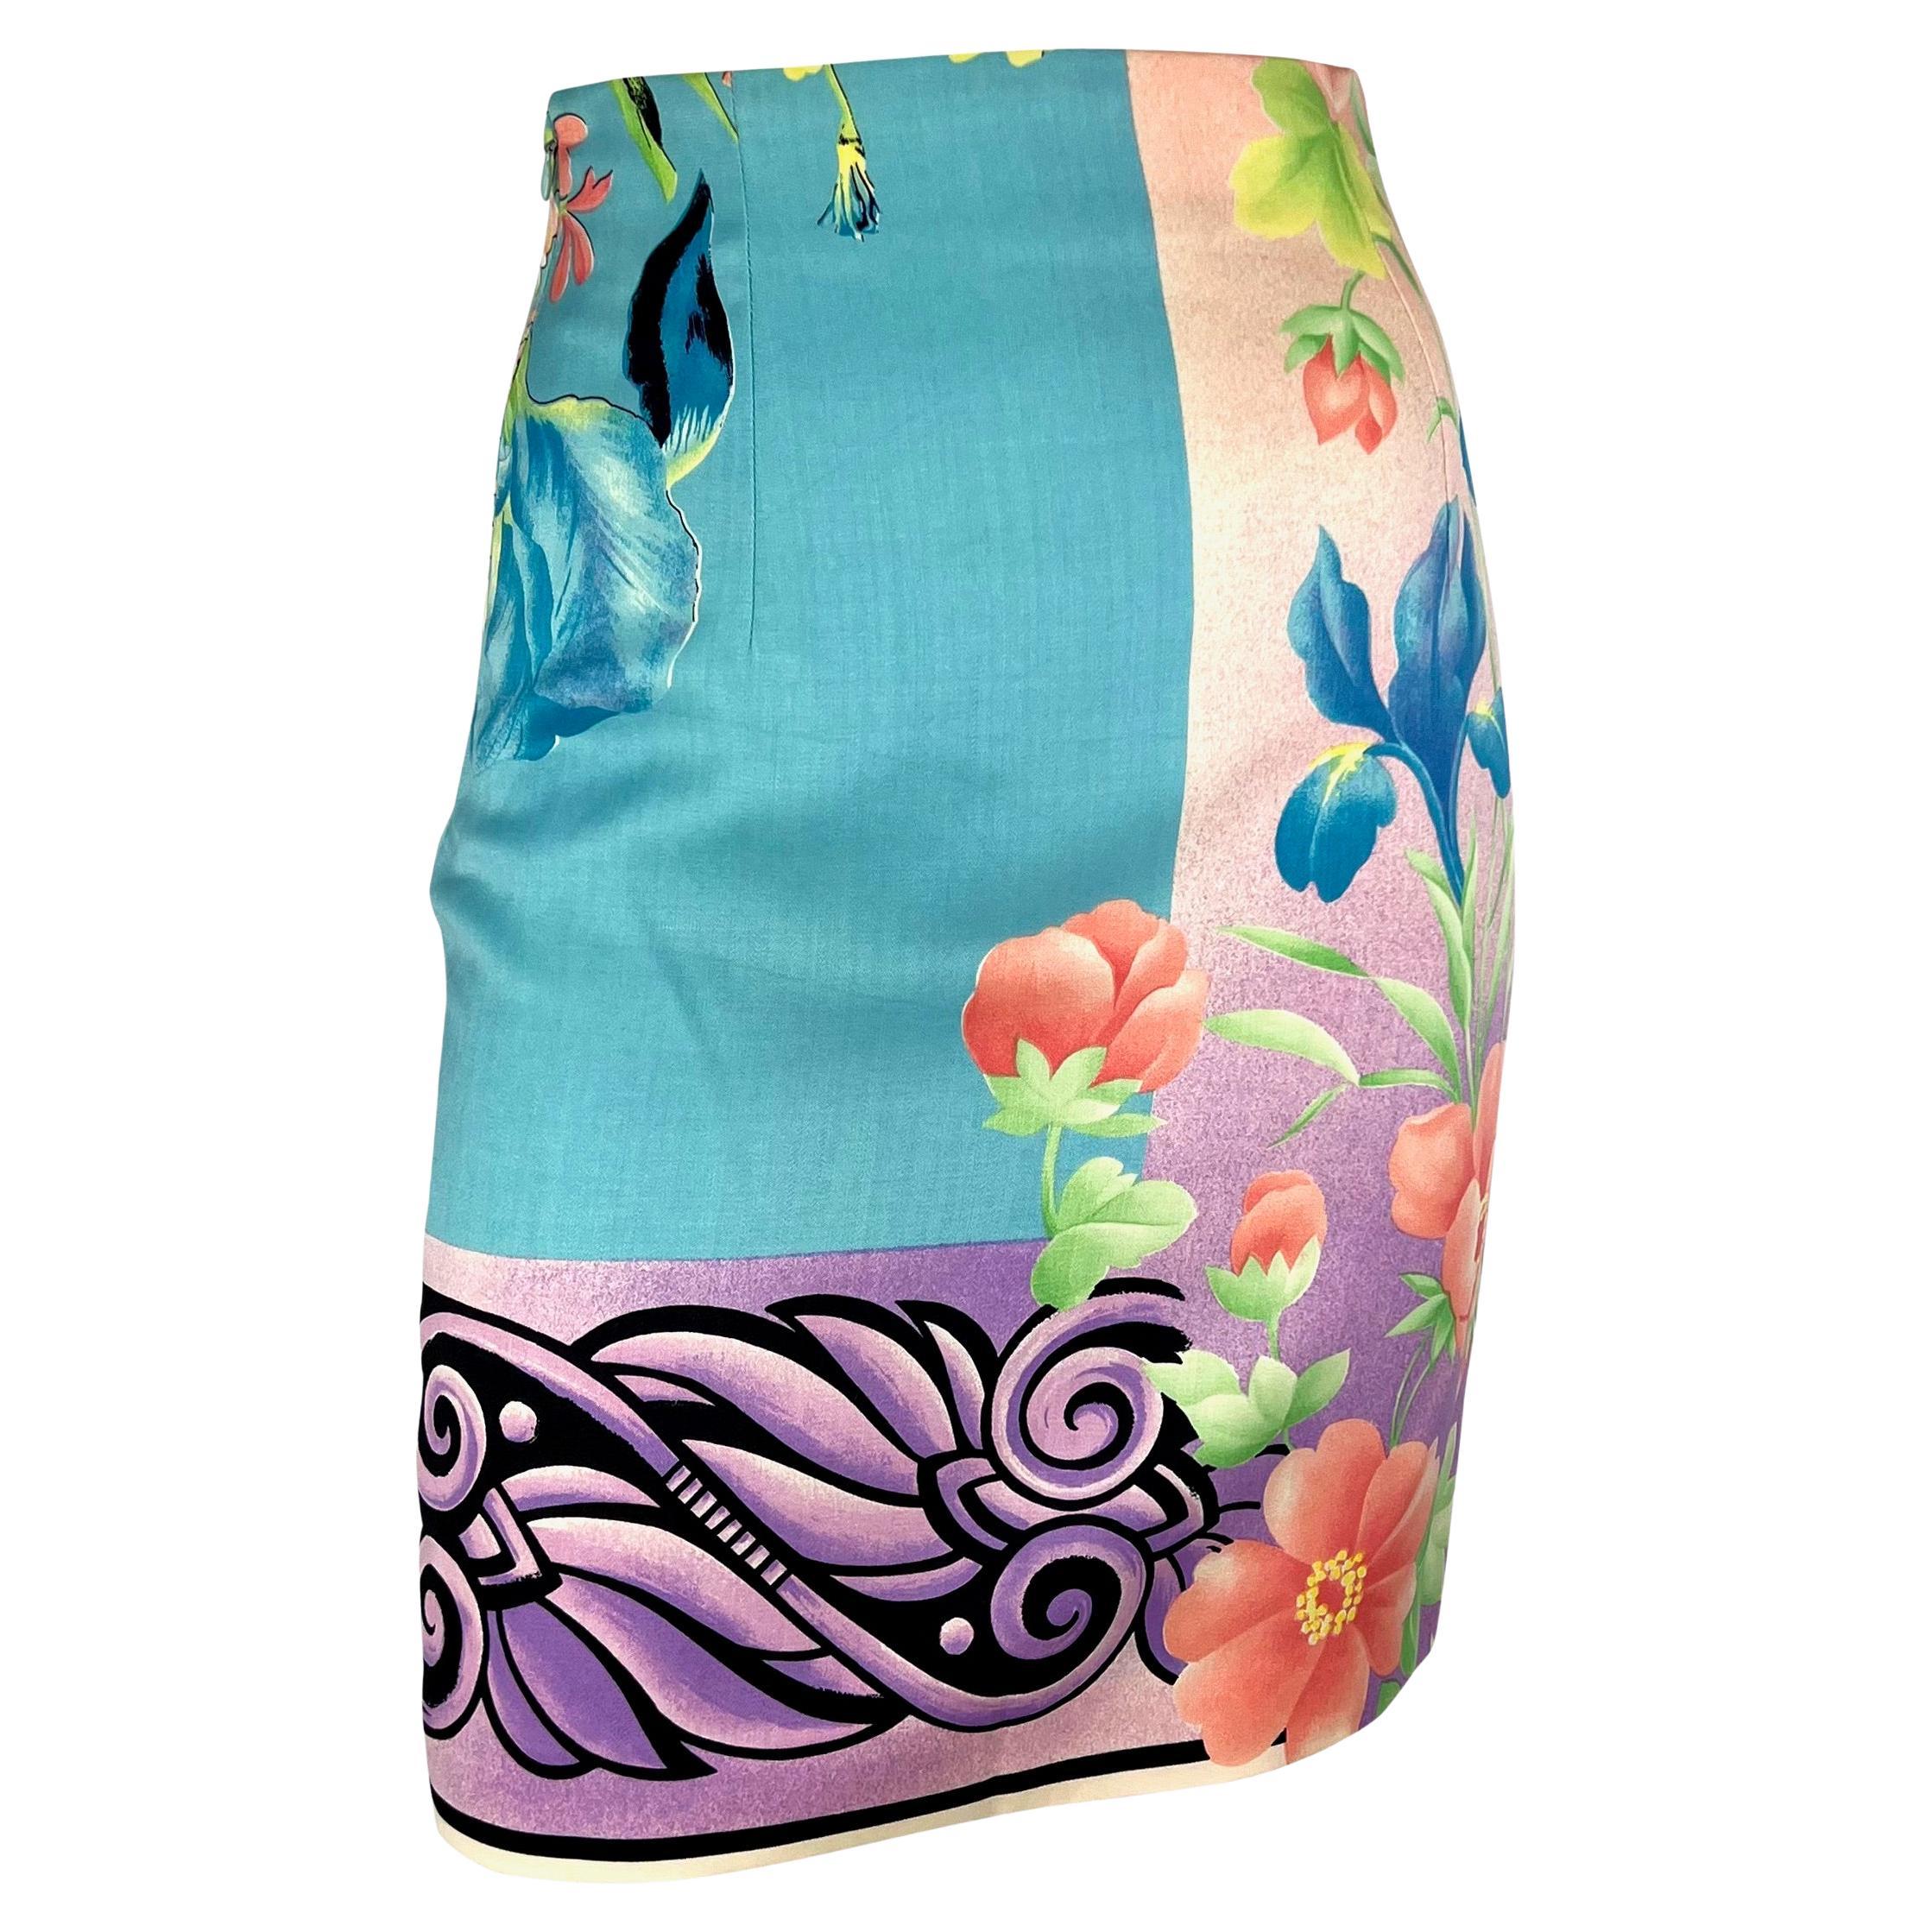 S/S 1992 Gianni Versace Couture Pastel Floral Mask Print Blue Pencil Skirt For Sale